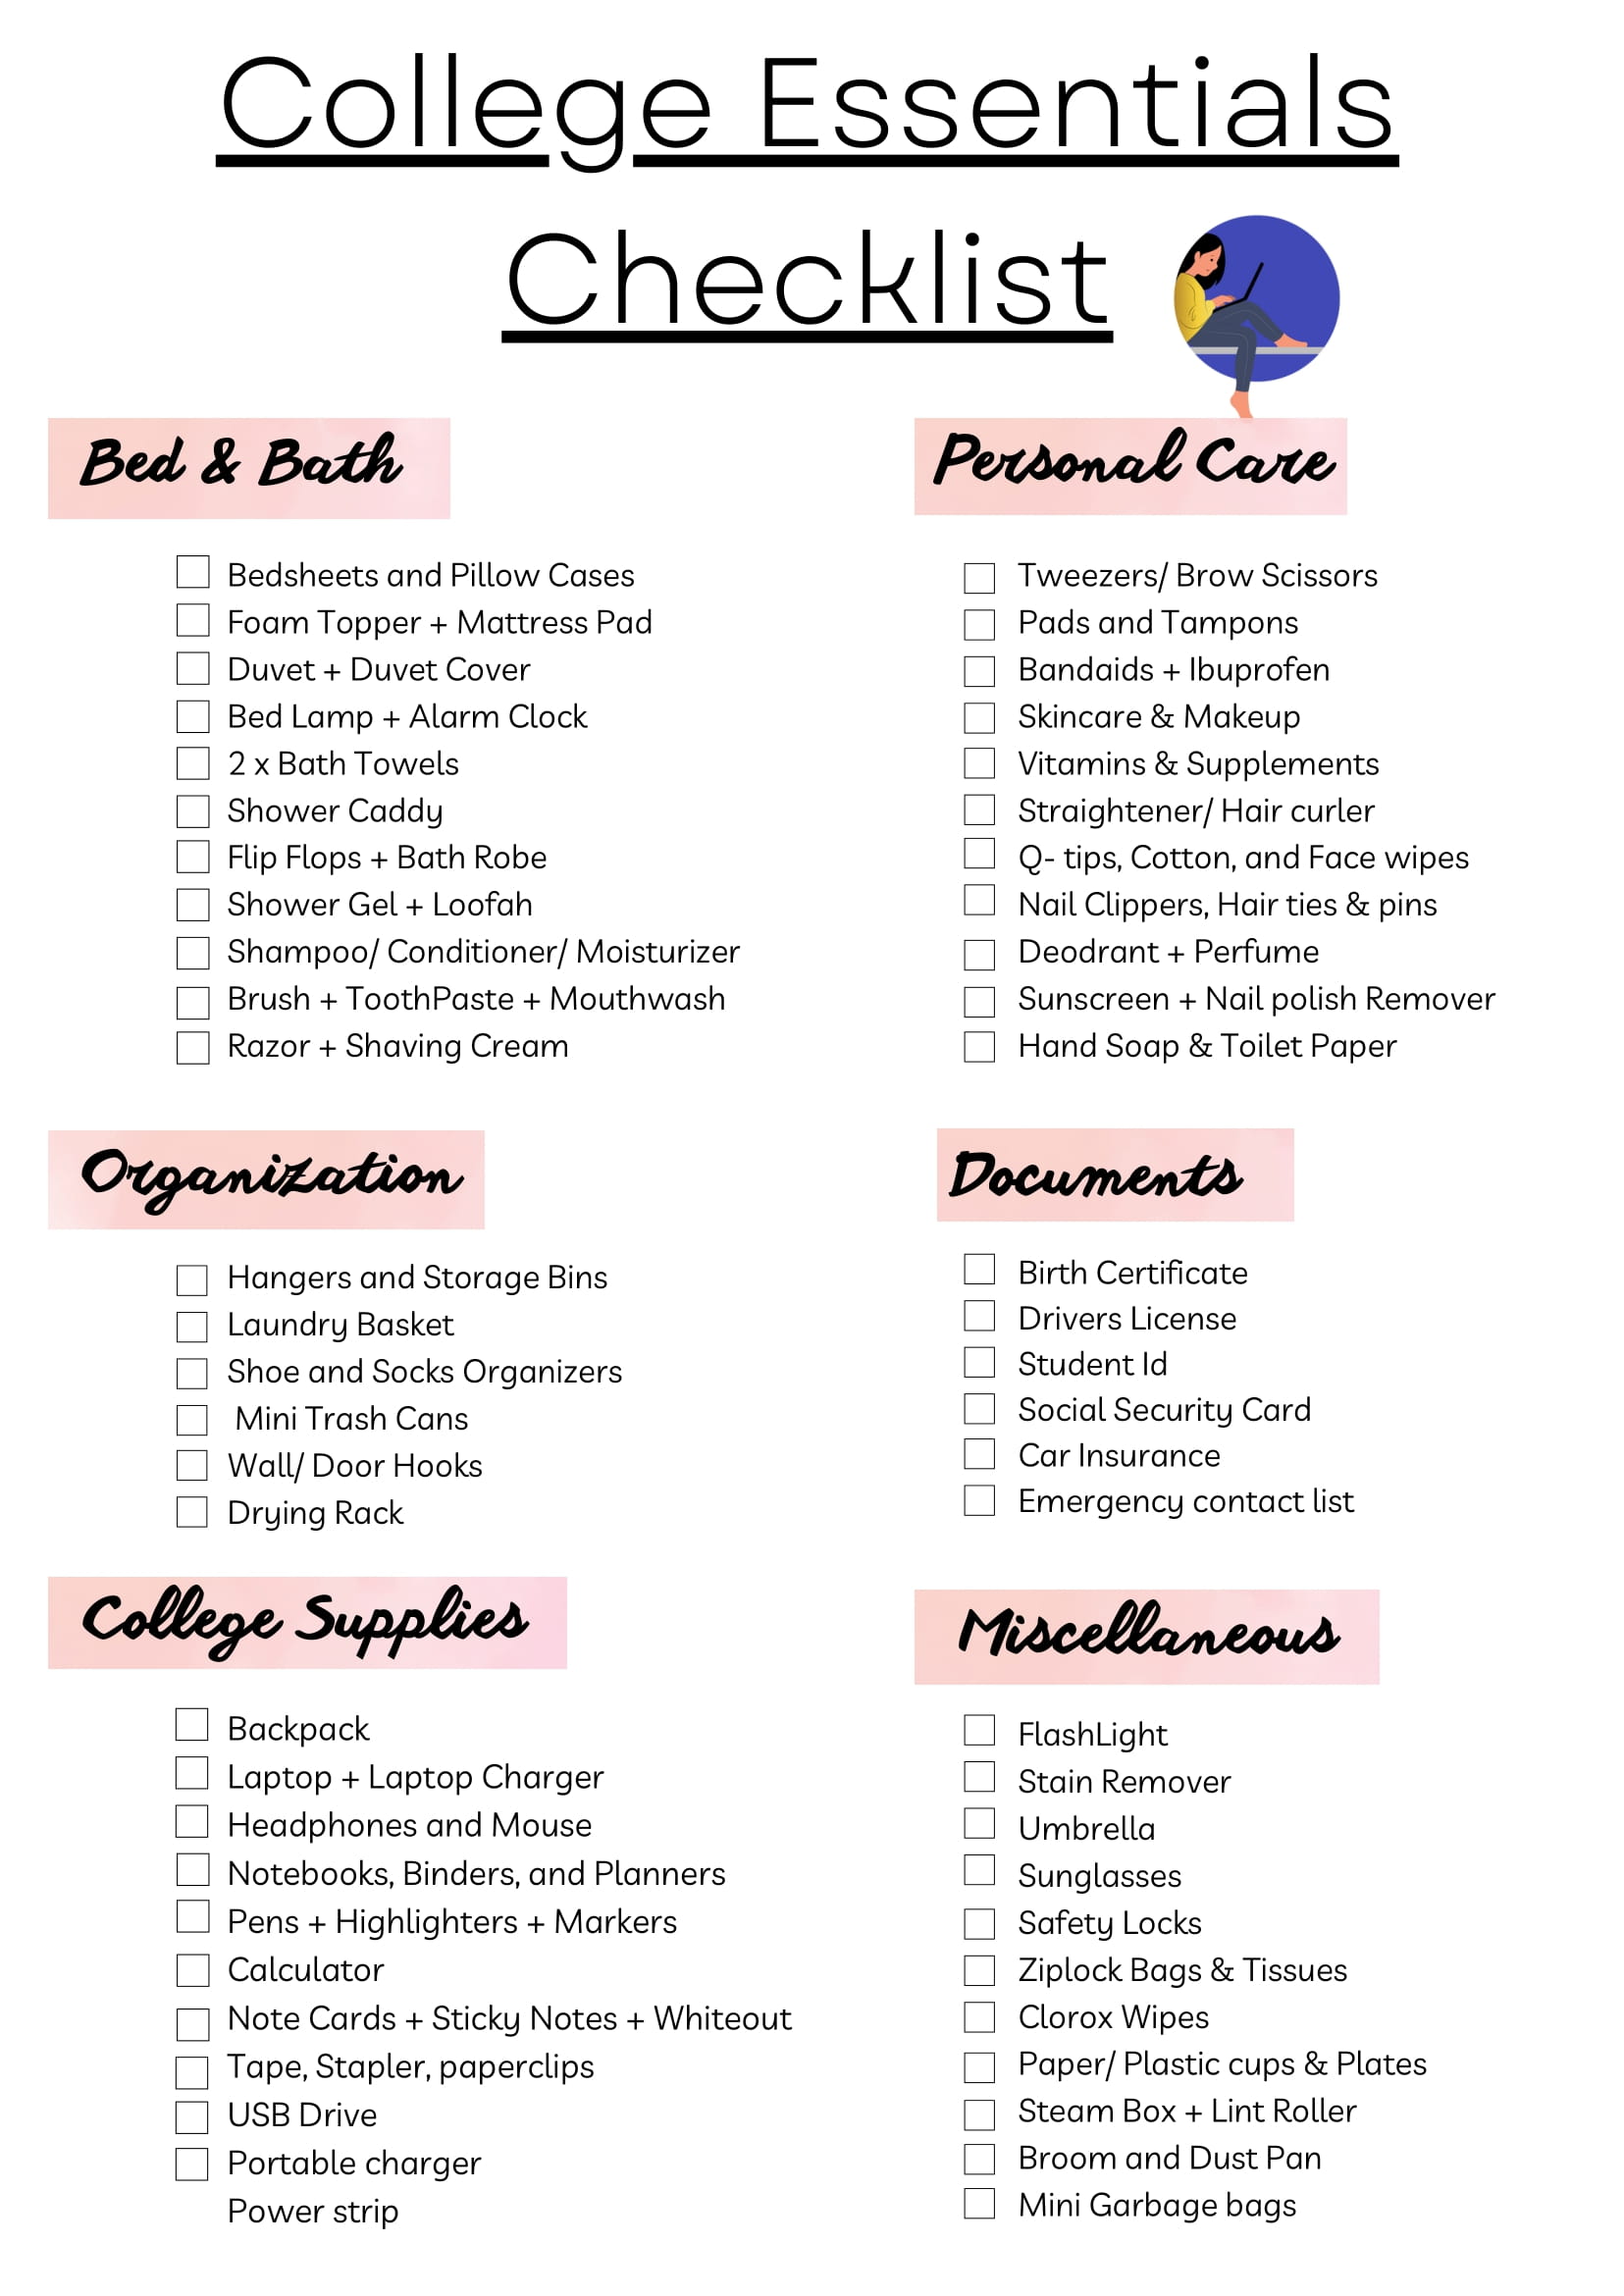 37 Free Printables for College Students - Life in Twentys